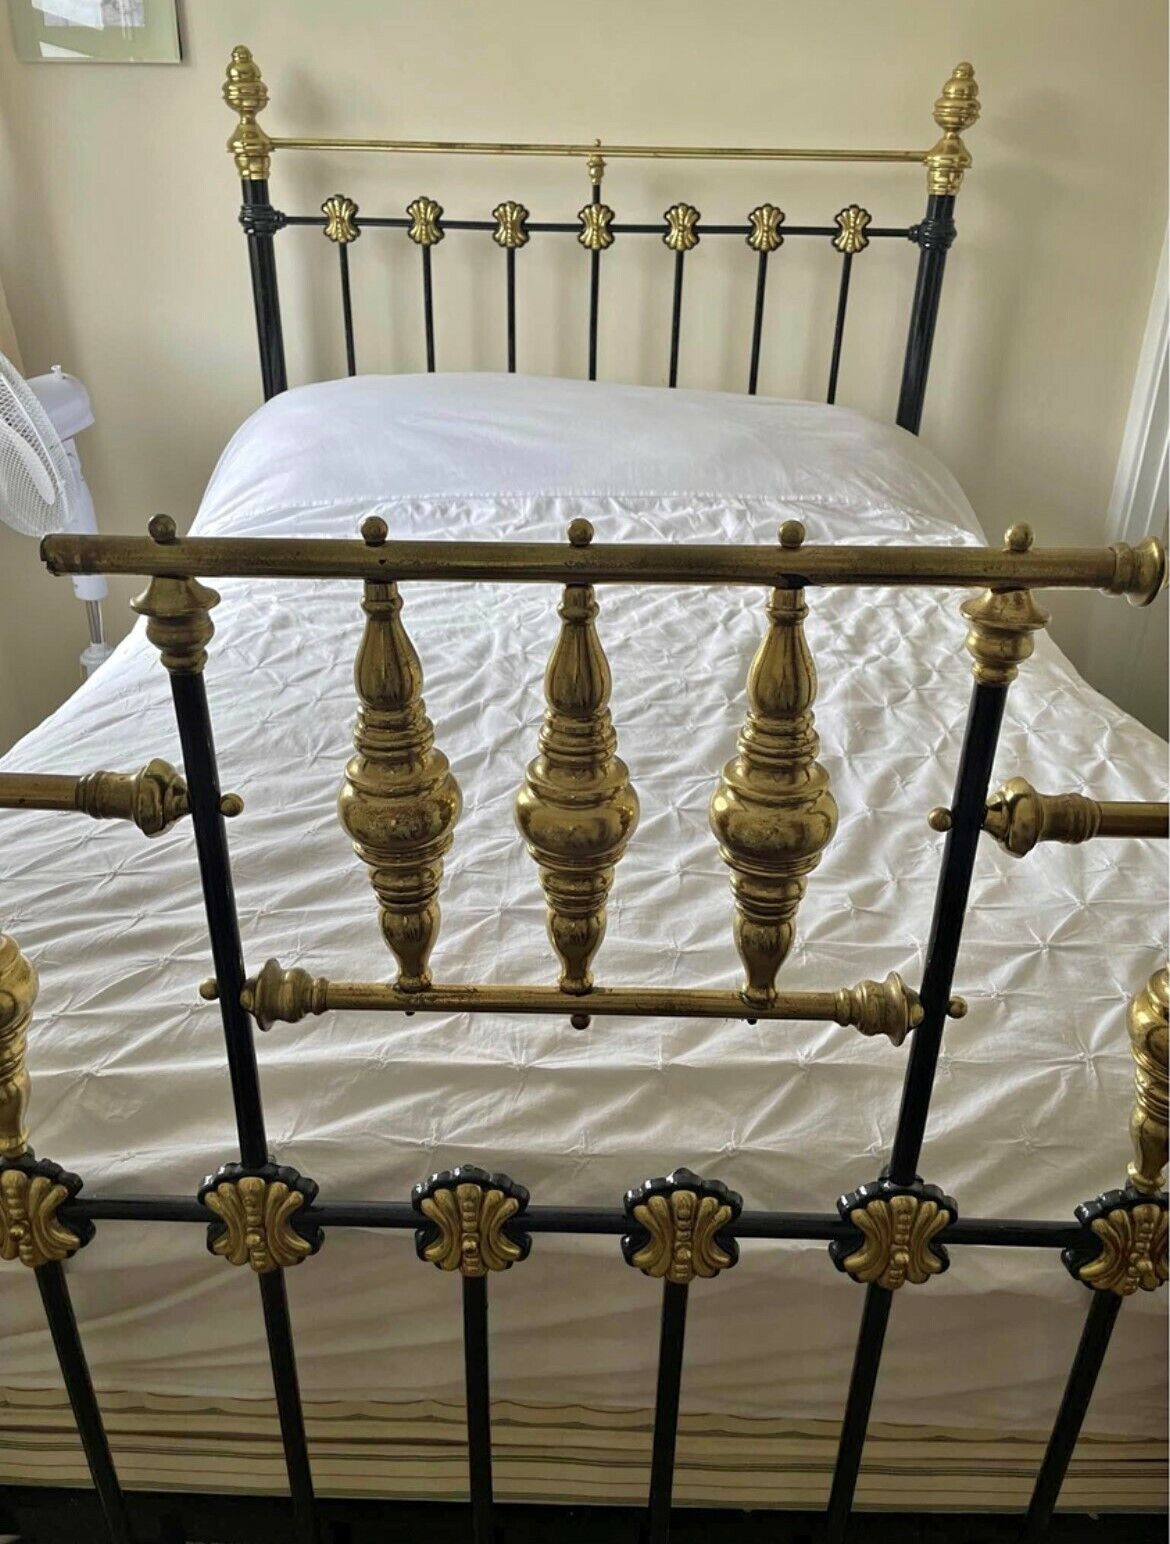 Buy Victorian Brass Iron Bedstead 4ft 6 Double, Requires Some TLC